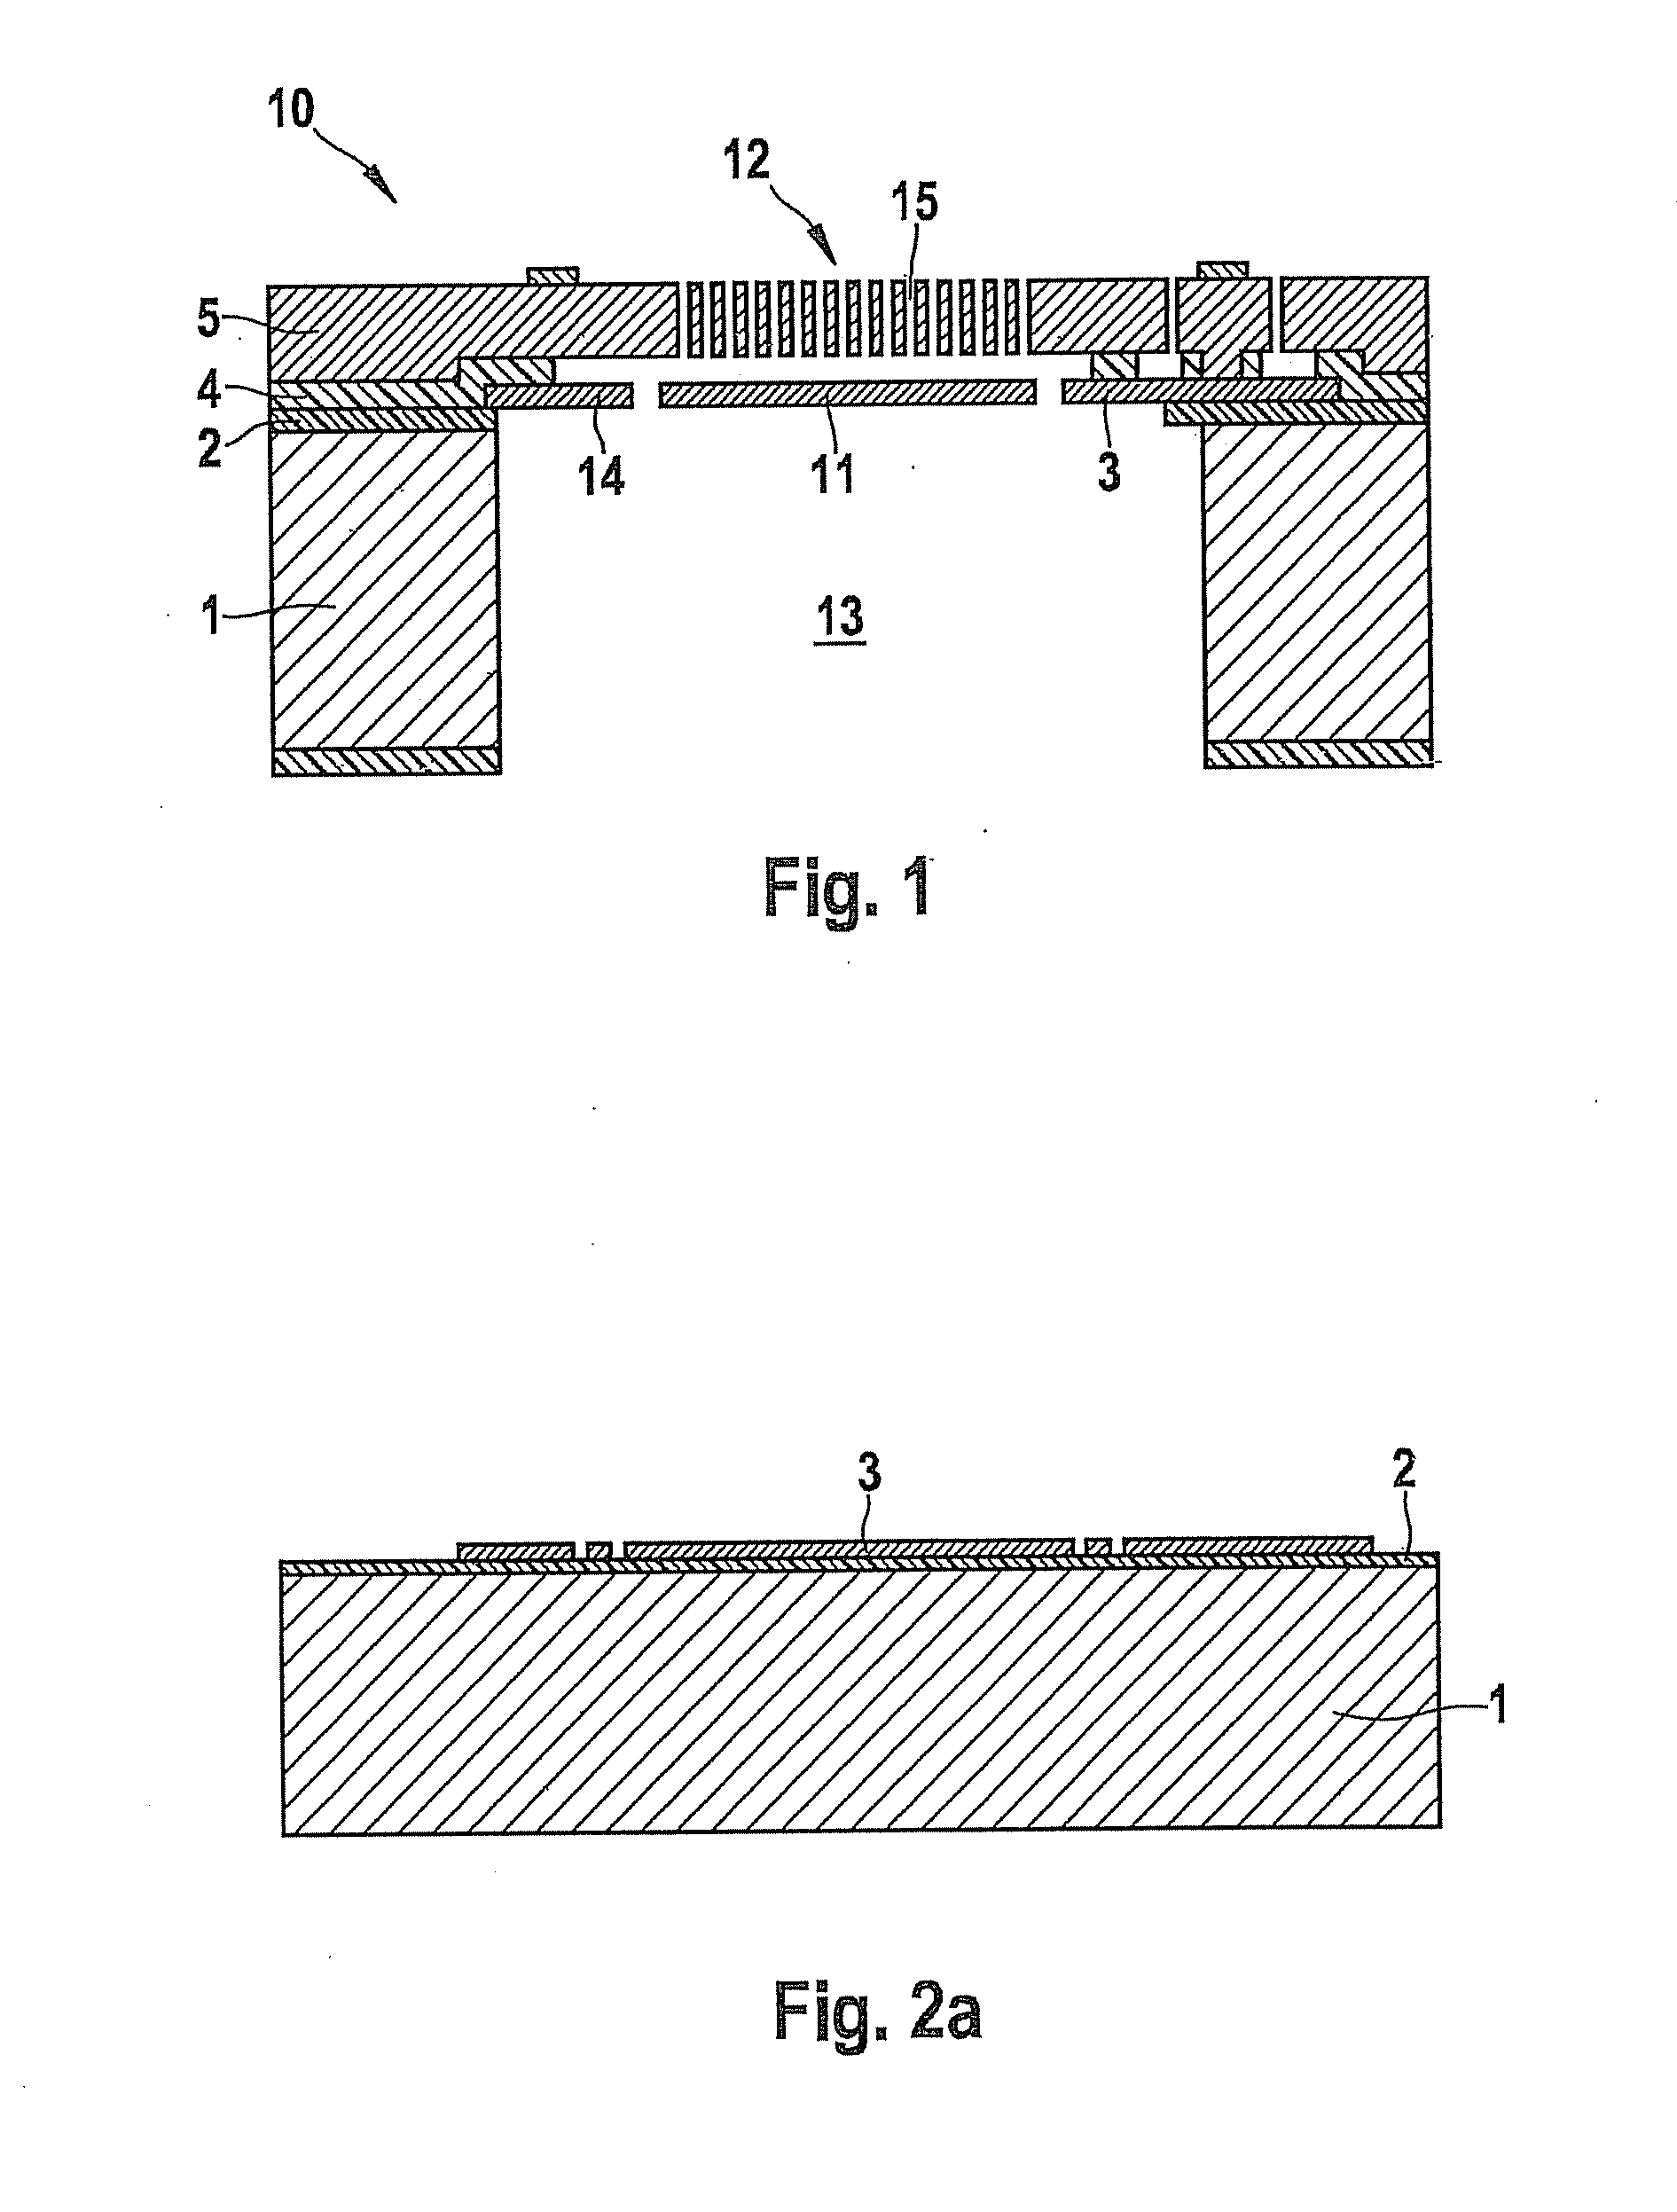 Component having a micromechanical microphone structure, and method for its production